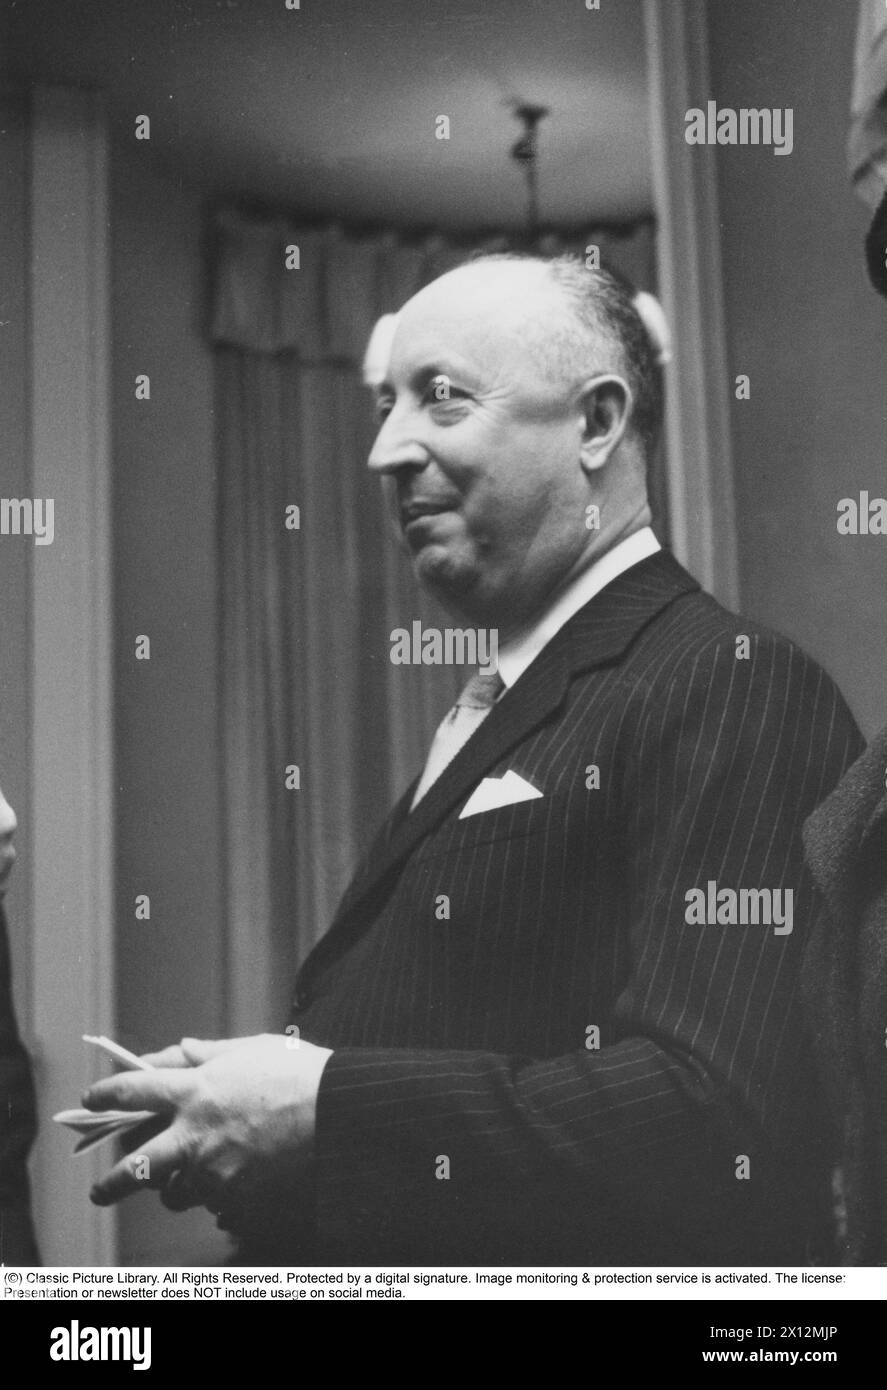 Christian Dior, born January 21, 1905 in Granville in Normandy, died October 23, 1957 in Montecatini Terme in Tuscany, Italy, was a French fashion designer. He is best known for founding the fashion house Dior and creating The New Look. Picture while being on a visit to Sweden 1957. Stock Photo